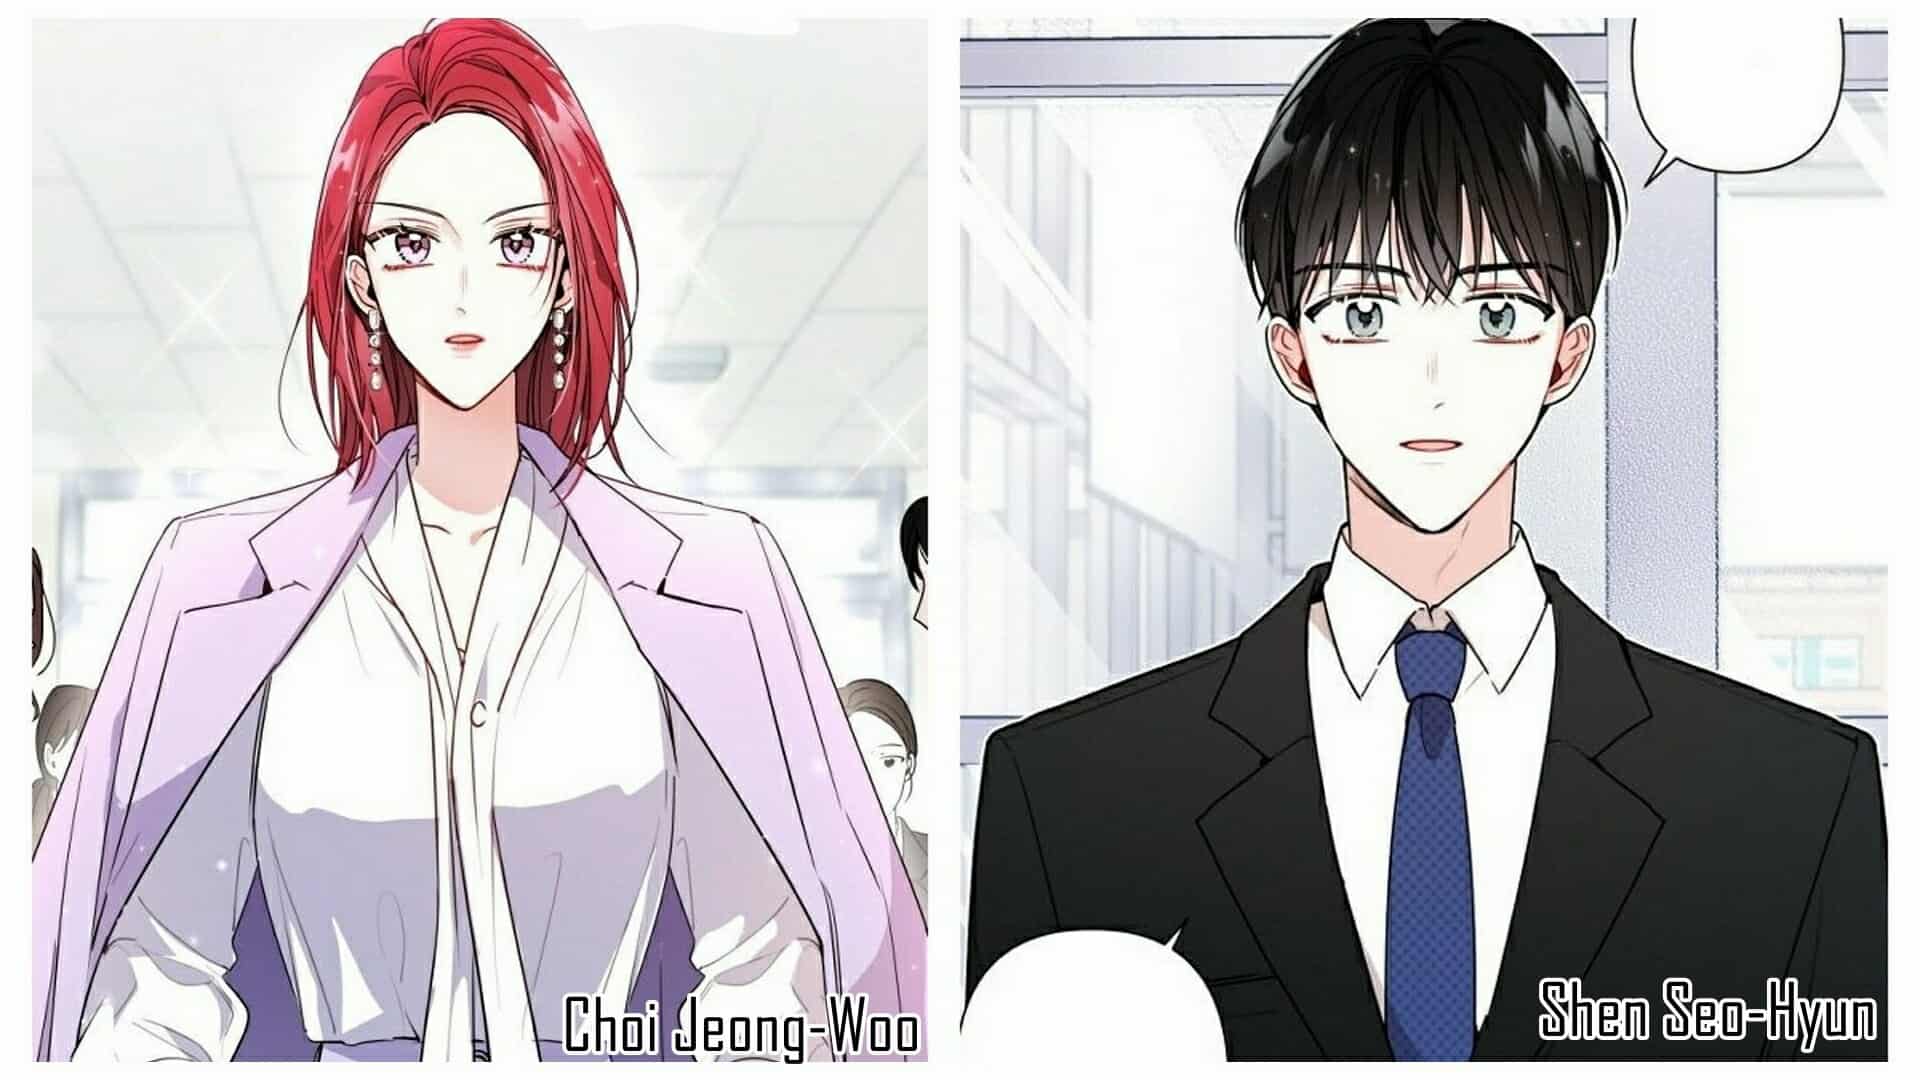 The CEO Of G Cosmetics - Choi Jeong-Woo (Left) And Her Assistant - Shen Seo-Hyun (Right) - Married To My Boss Chapter 1